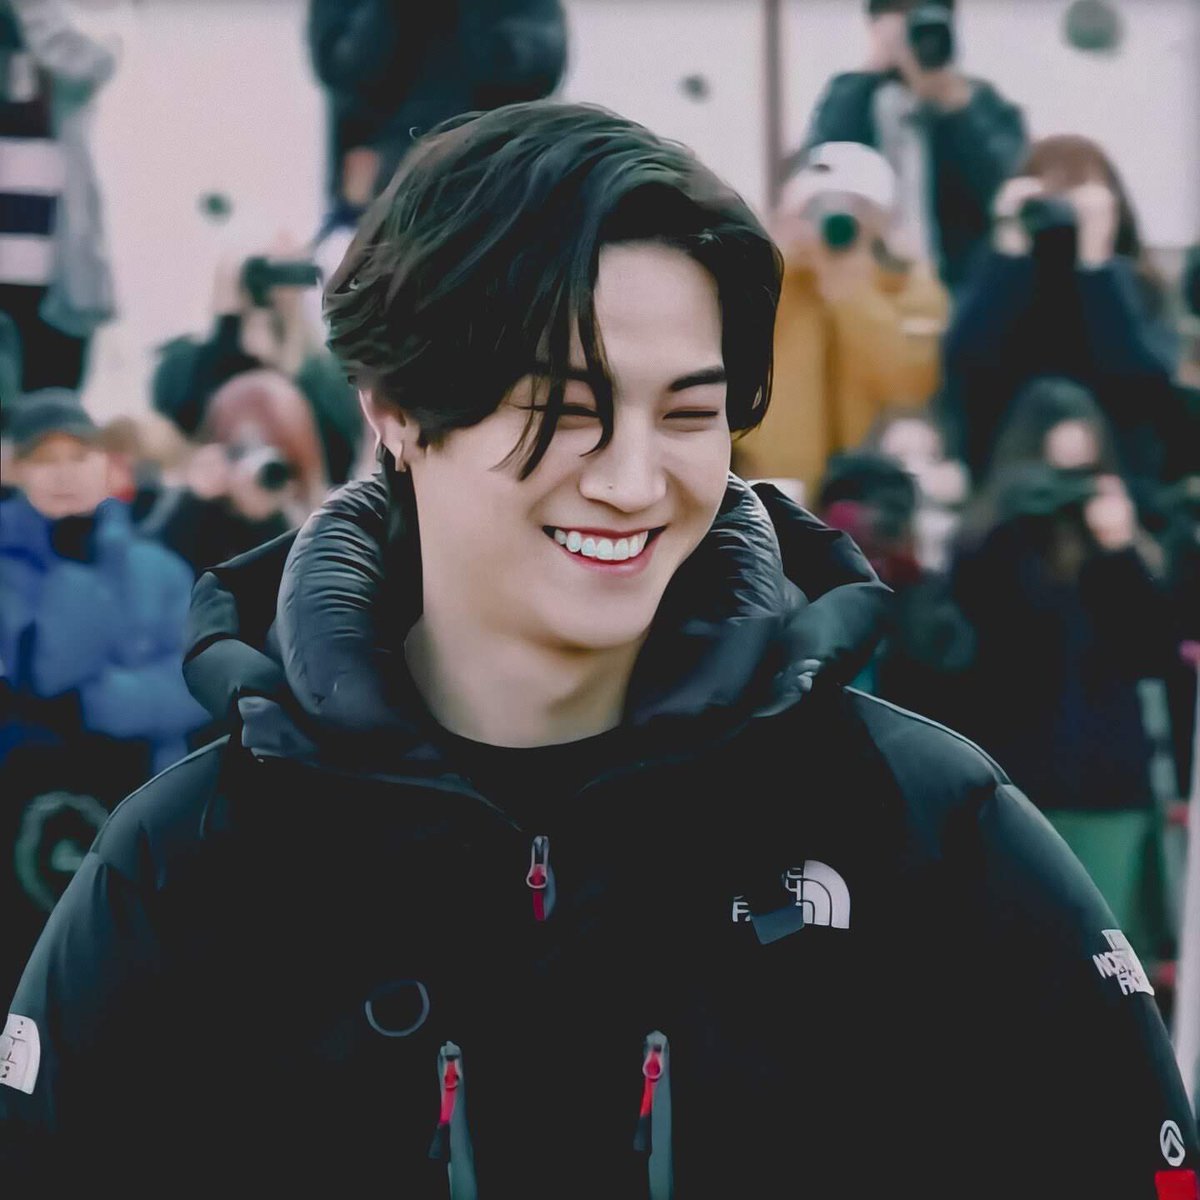 To JaebeomI’ve gotten to learn so much from you, the more you share your thoughts the more amazed I get! Your smile brightens my life daily and your voice never fails to calm me downThank you for being unapologetically yourself 